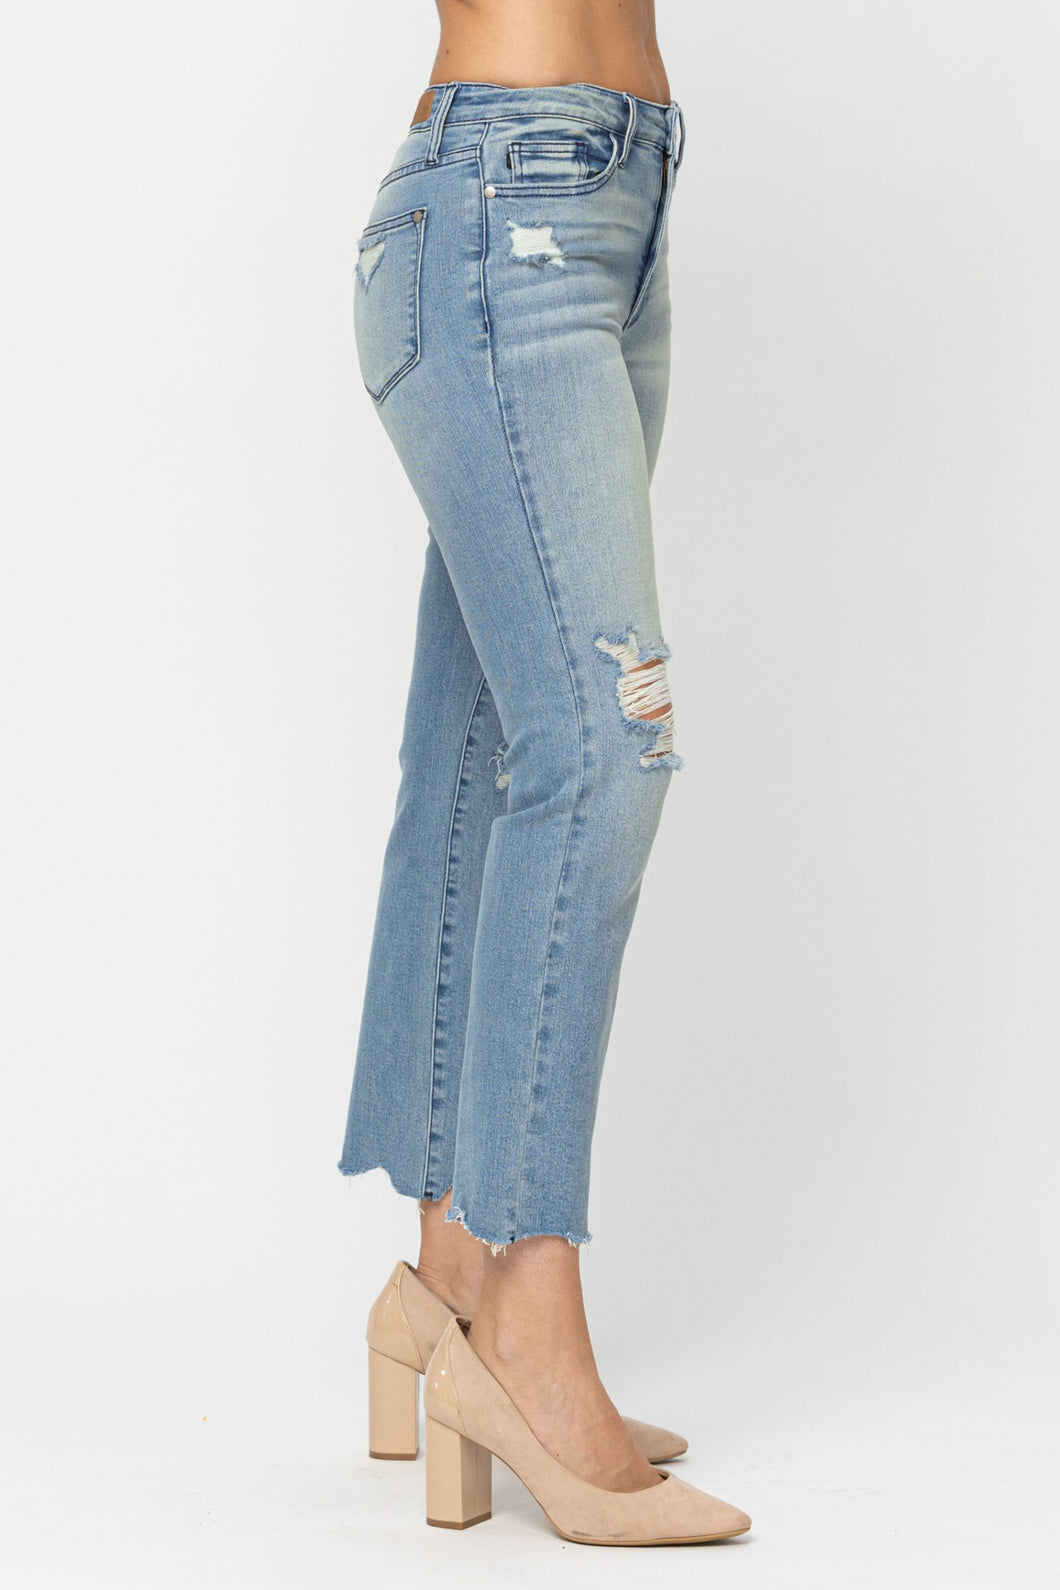 Judy Blue Straight Ankle Distressed Jeans